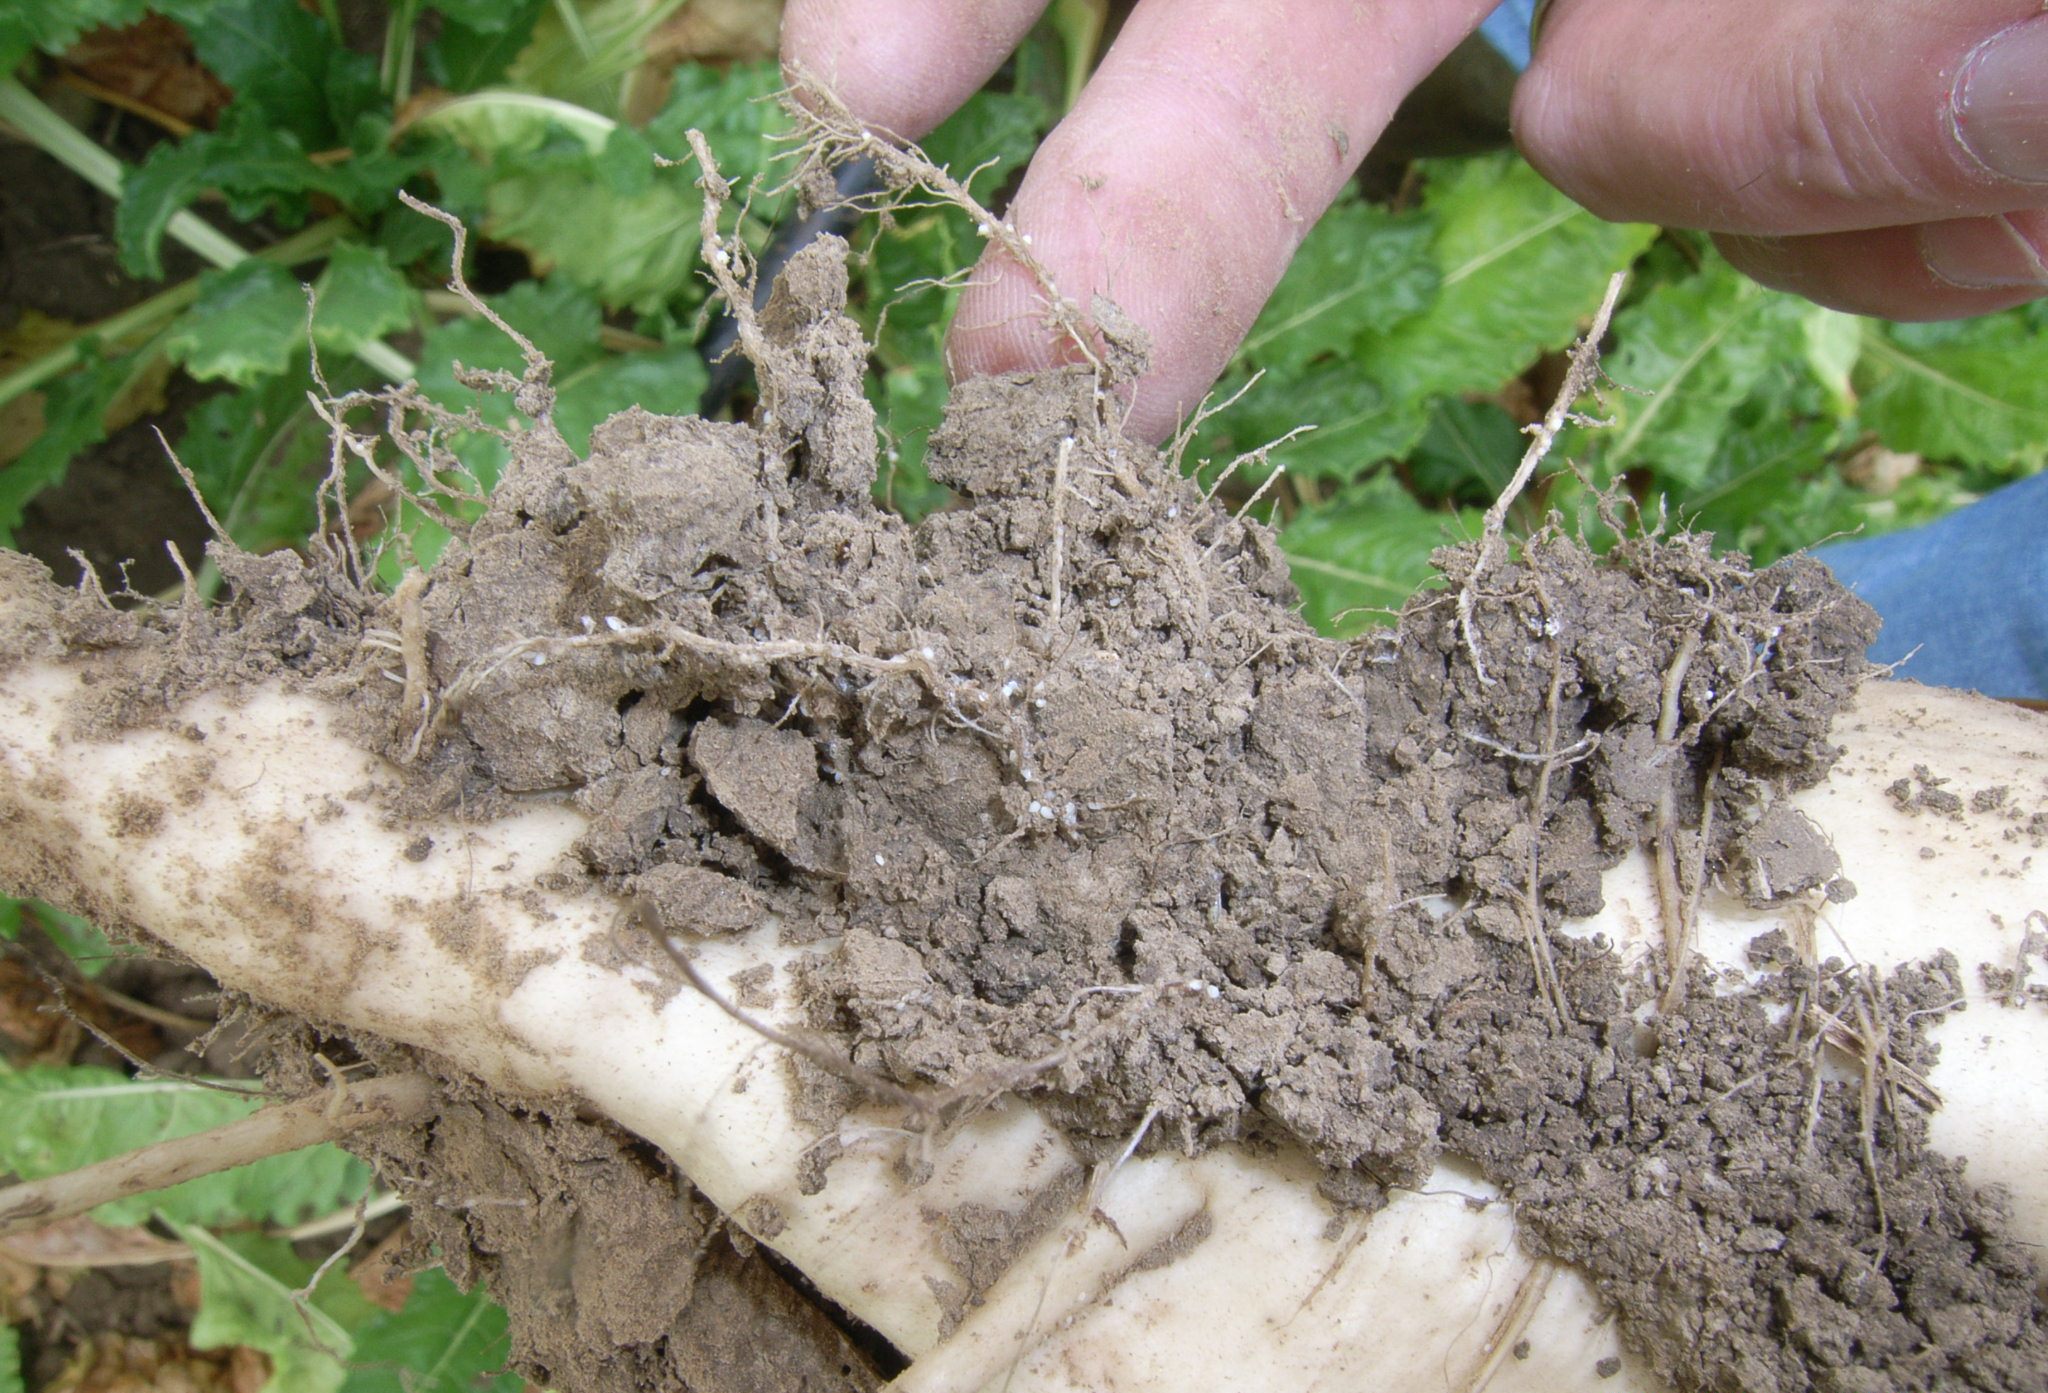 Nematode cysts using sugarbeet as an example 